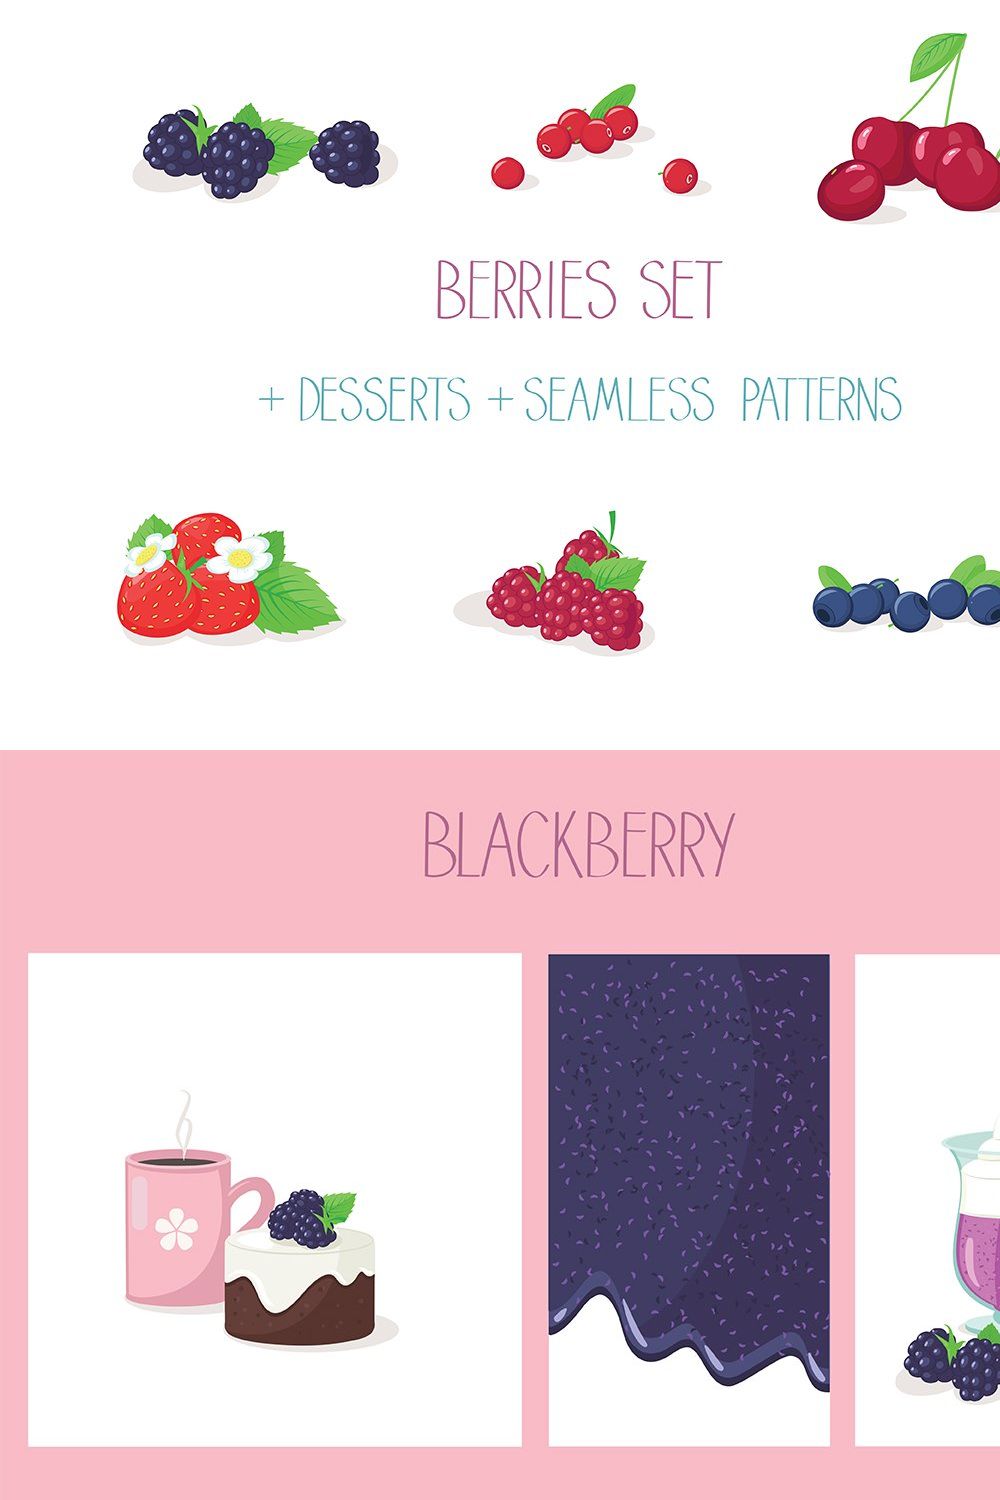 Berries set with desserts & patterns pinterest preview image.